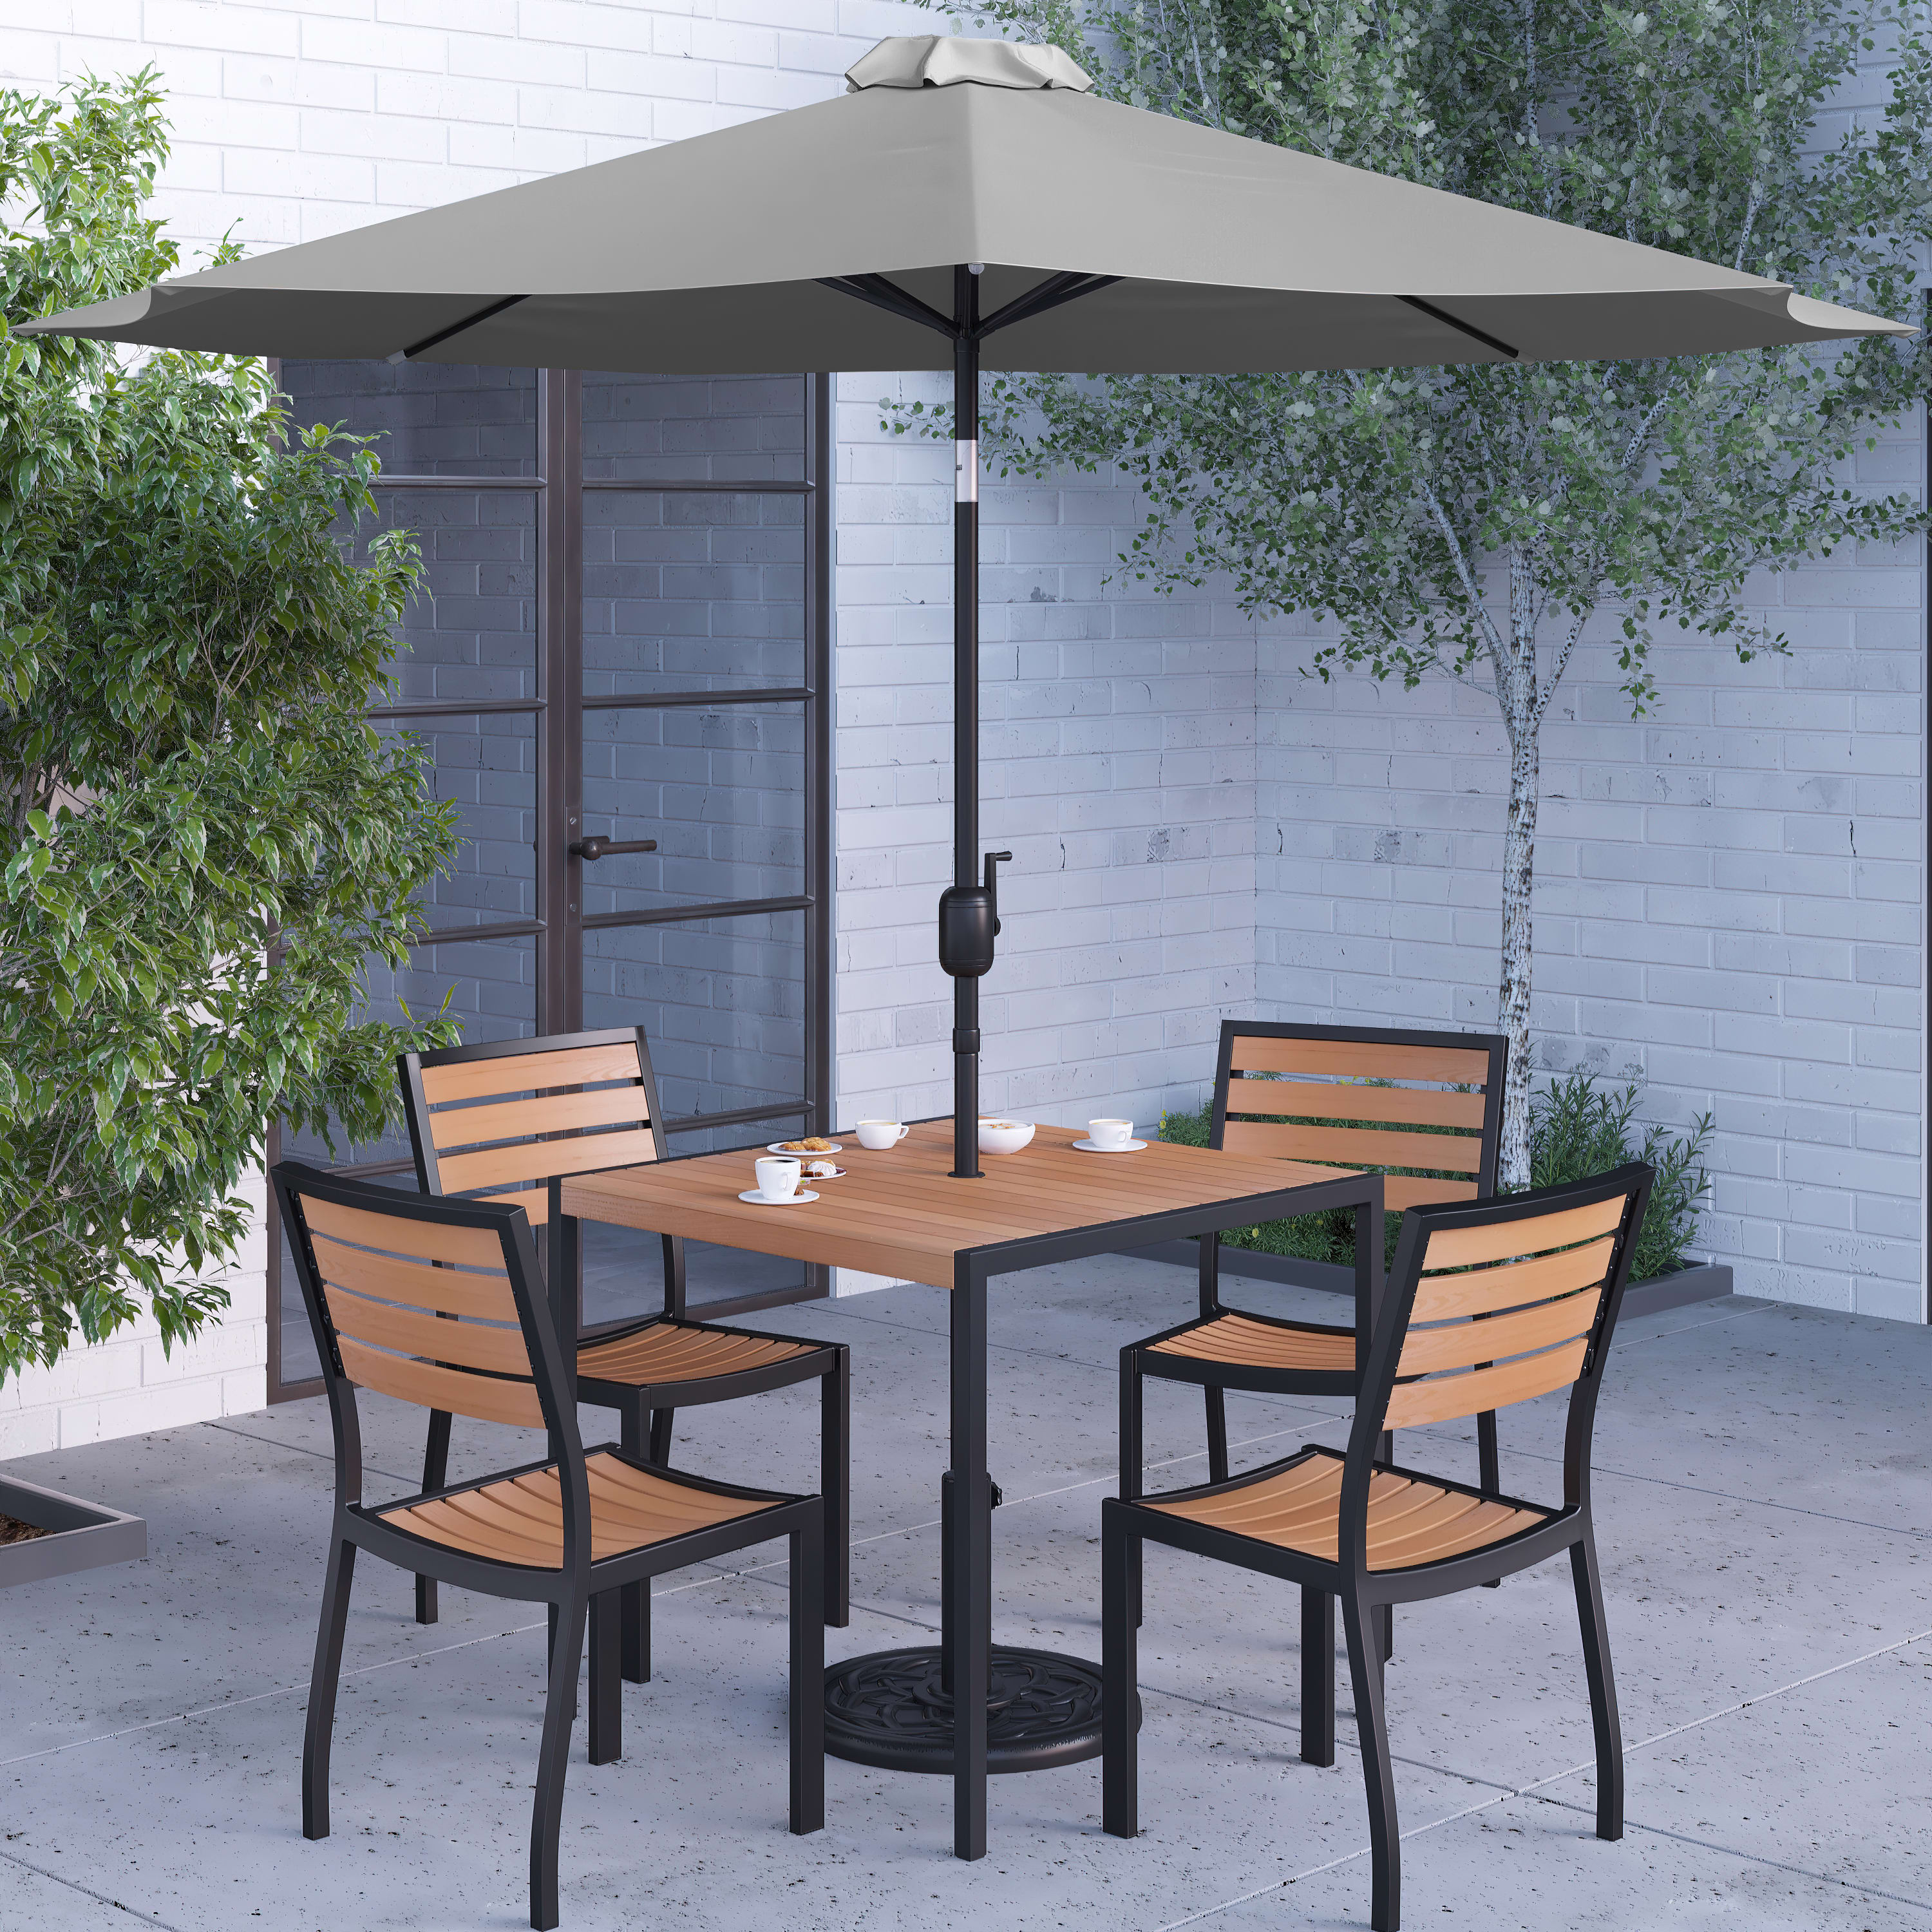 Merrick Lane Seven Piece Faux Teak Patio Dining Set - 35" Square Table, 4 Armless Stacking Club Chairs and 9' Gray Patio Umbrella & Base - image 3 of 18